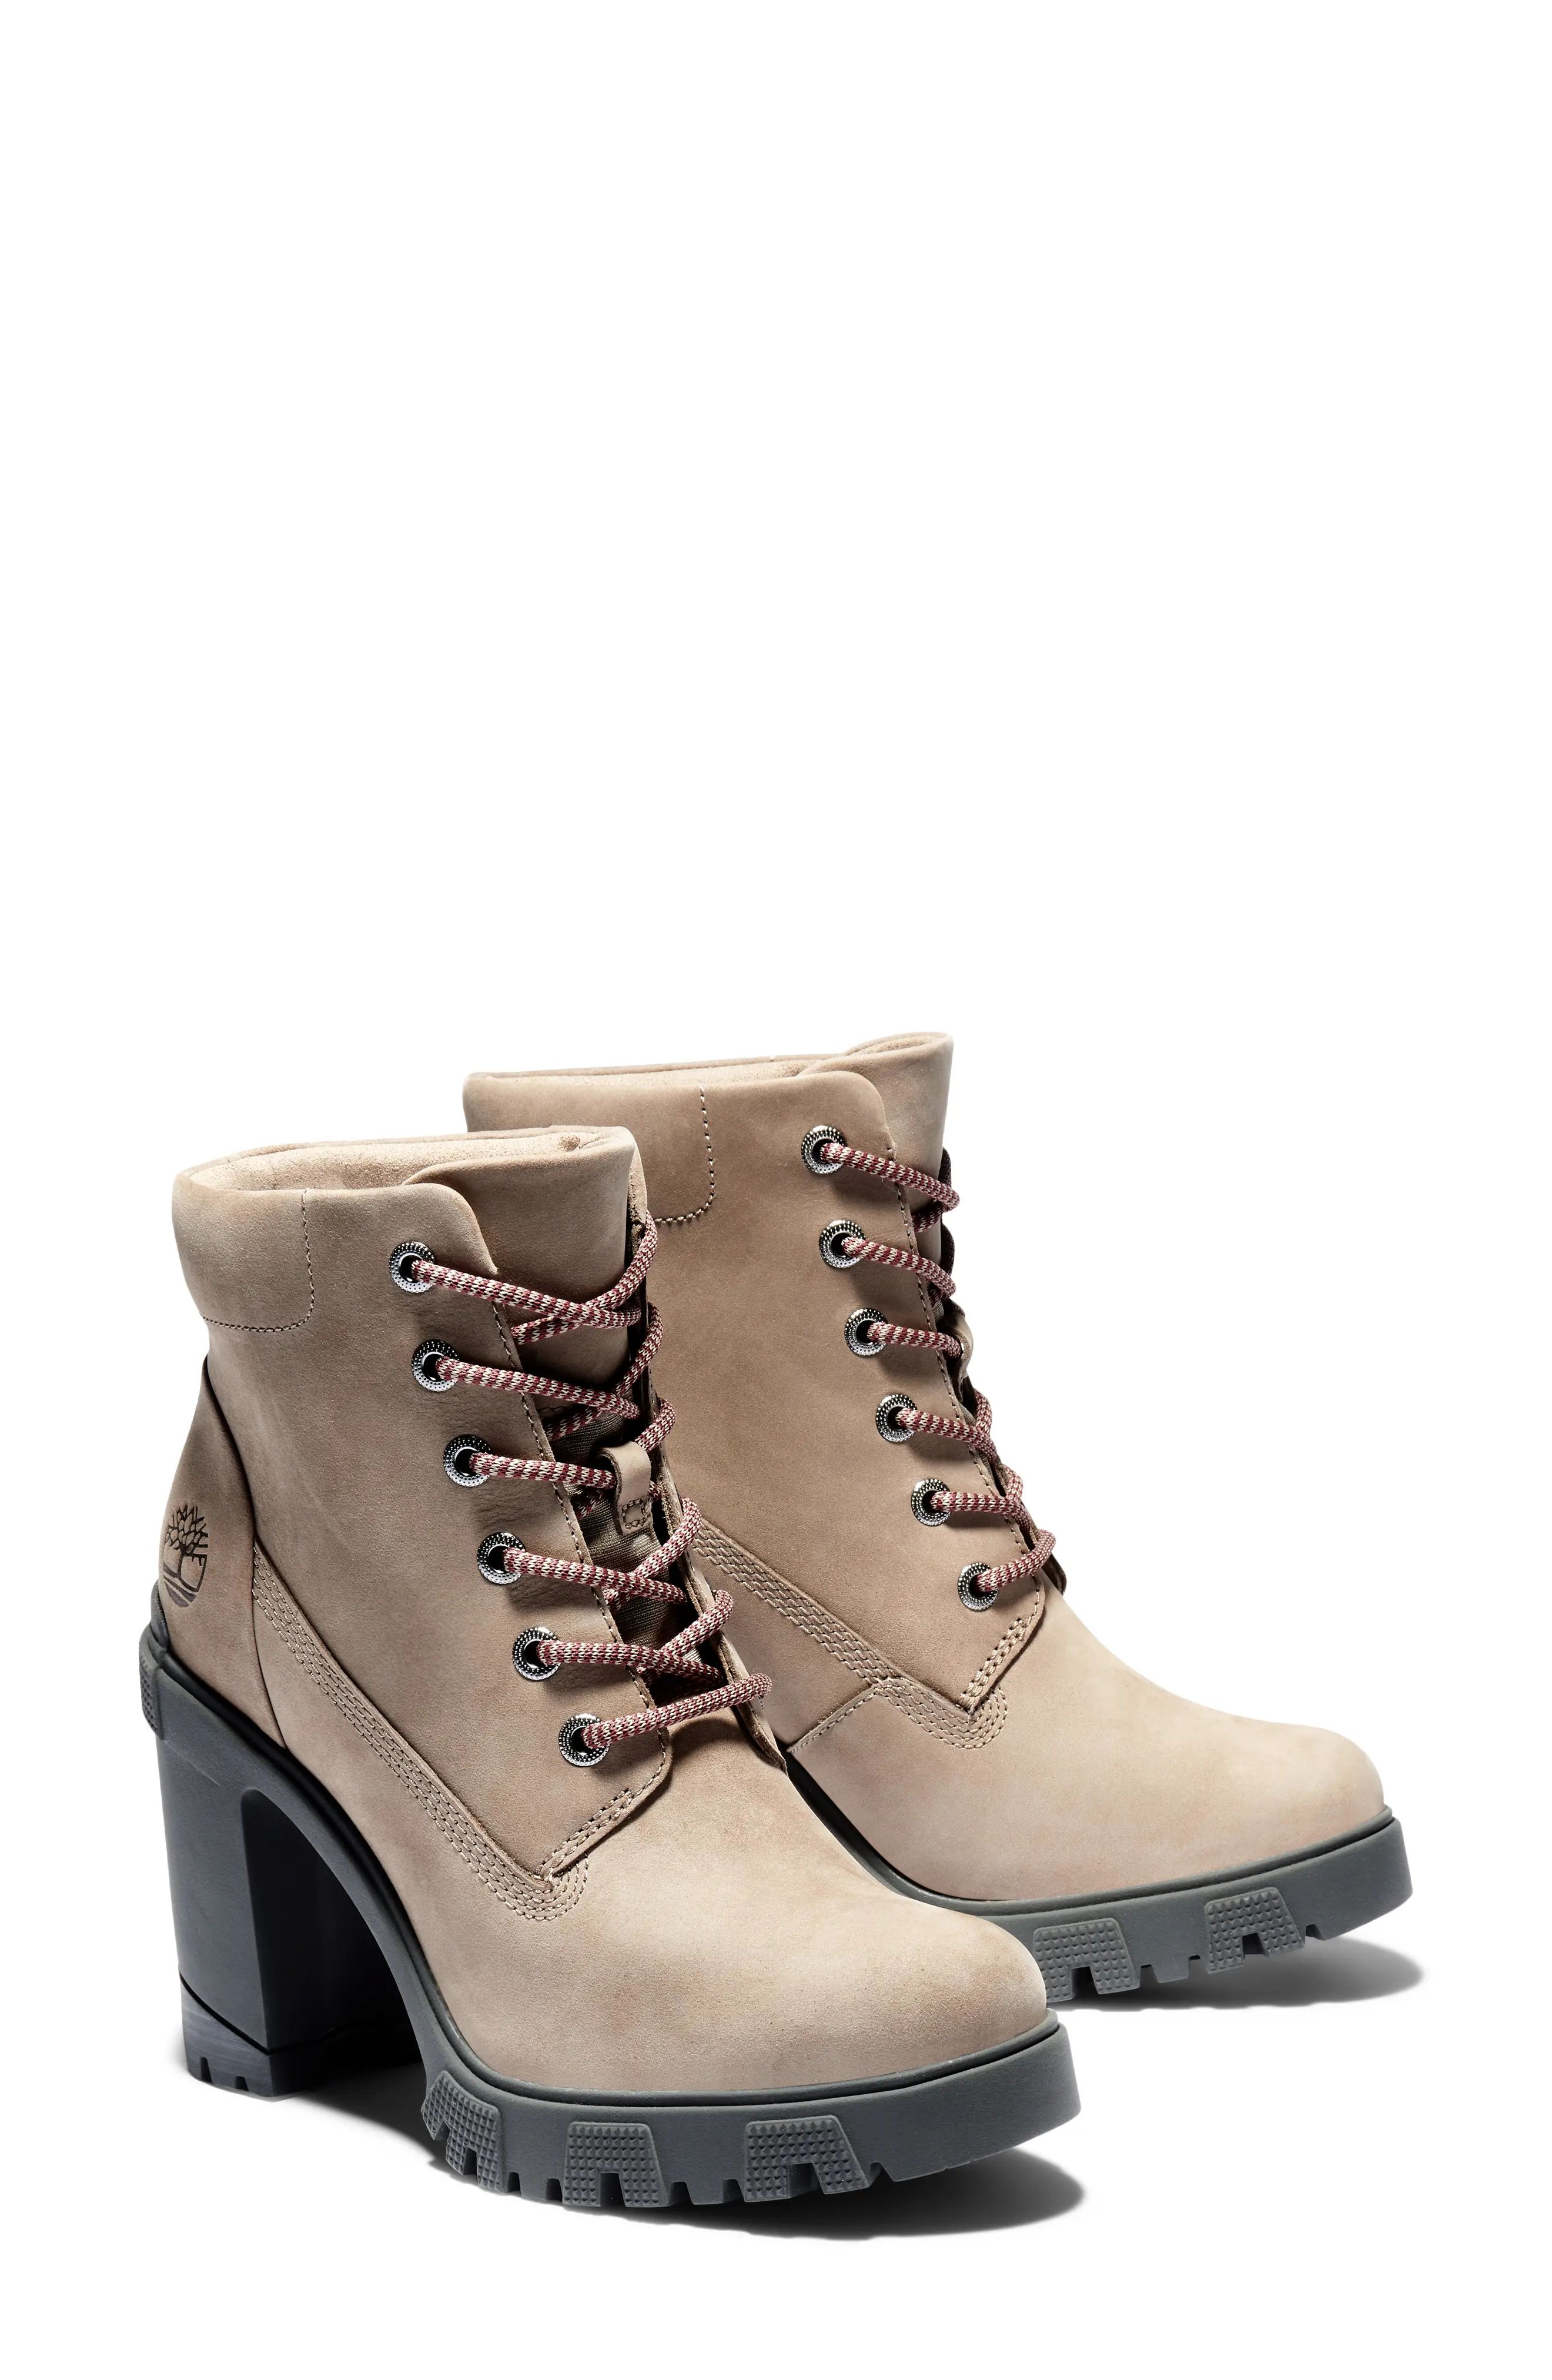 Women's Timberland Lana Water Resistant Lace-Up Boot, Size 8 M - Grey | Nordstrom